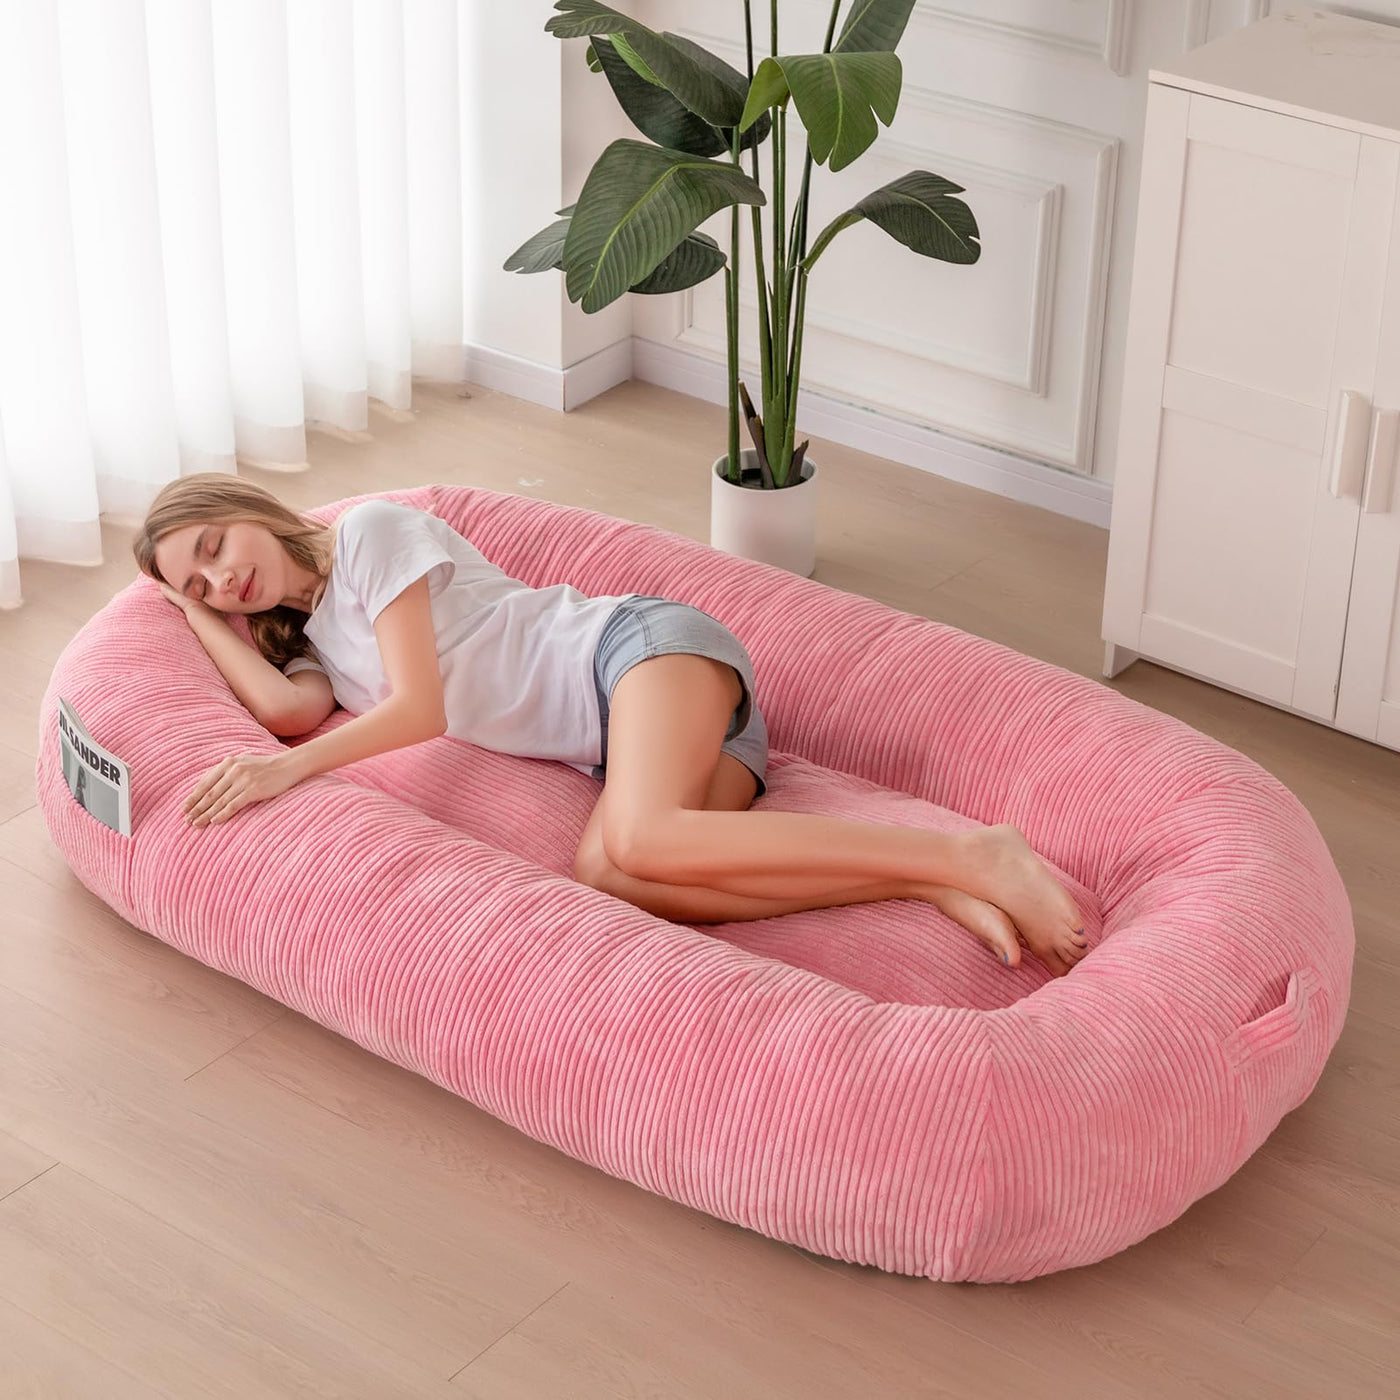 MAXYOYO Human Dog Bed, Corduroy Giant Bean Bag Dog Bed for Humans and Pets, Pink